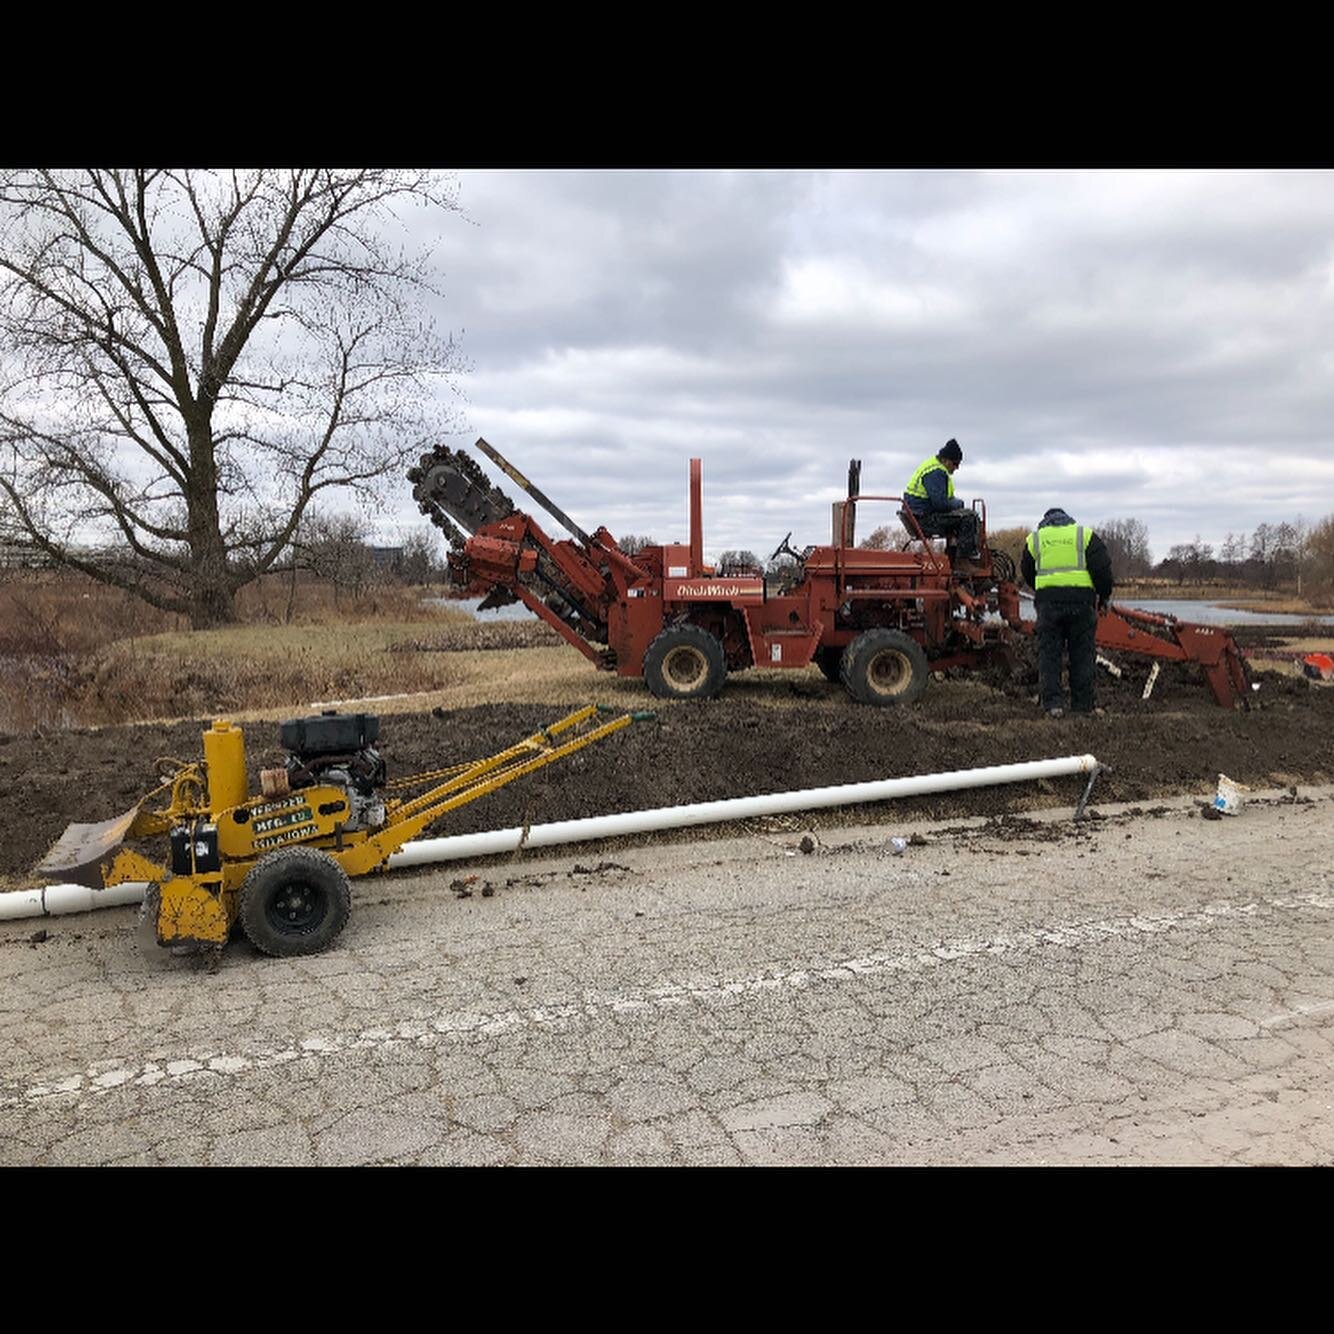 Early Season at Chicago Botanic Gardens 
#chicagobotanicgarden #earlyseason #installation #irrigation #landscape #commercial #ditchwitch #vermeer #trenching #chicago #illinois